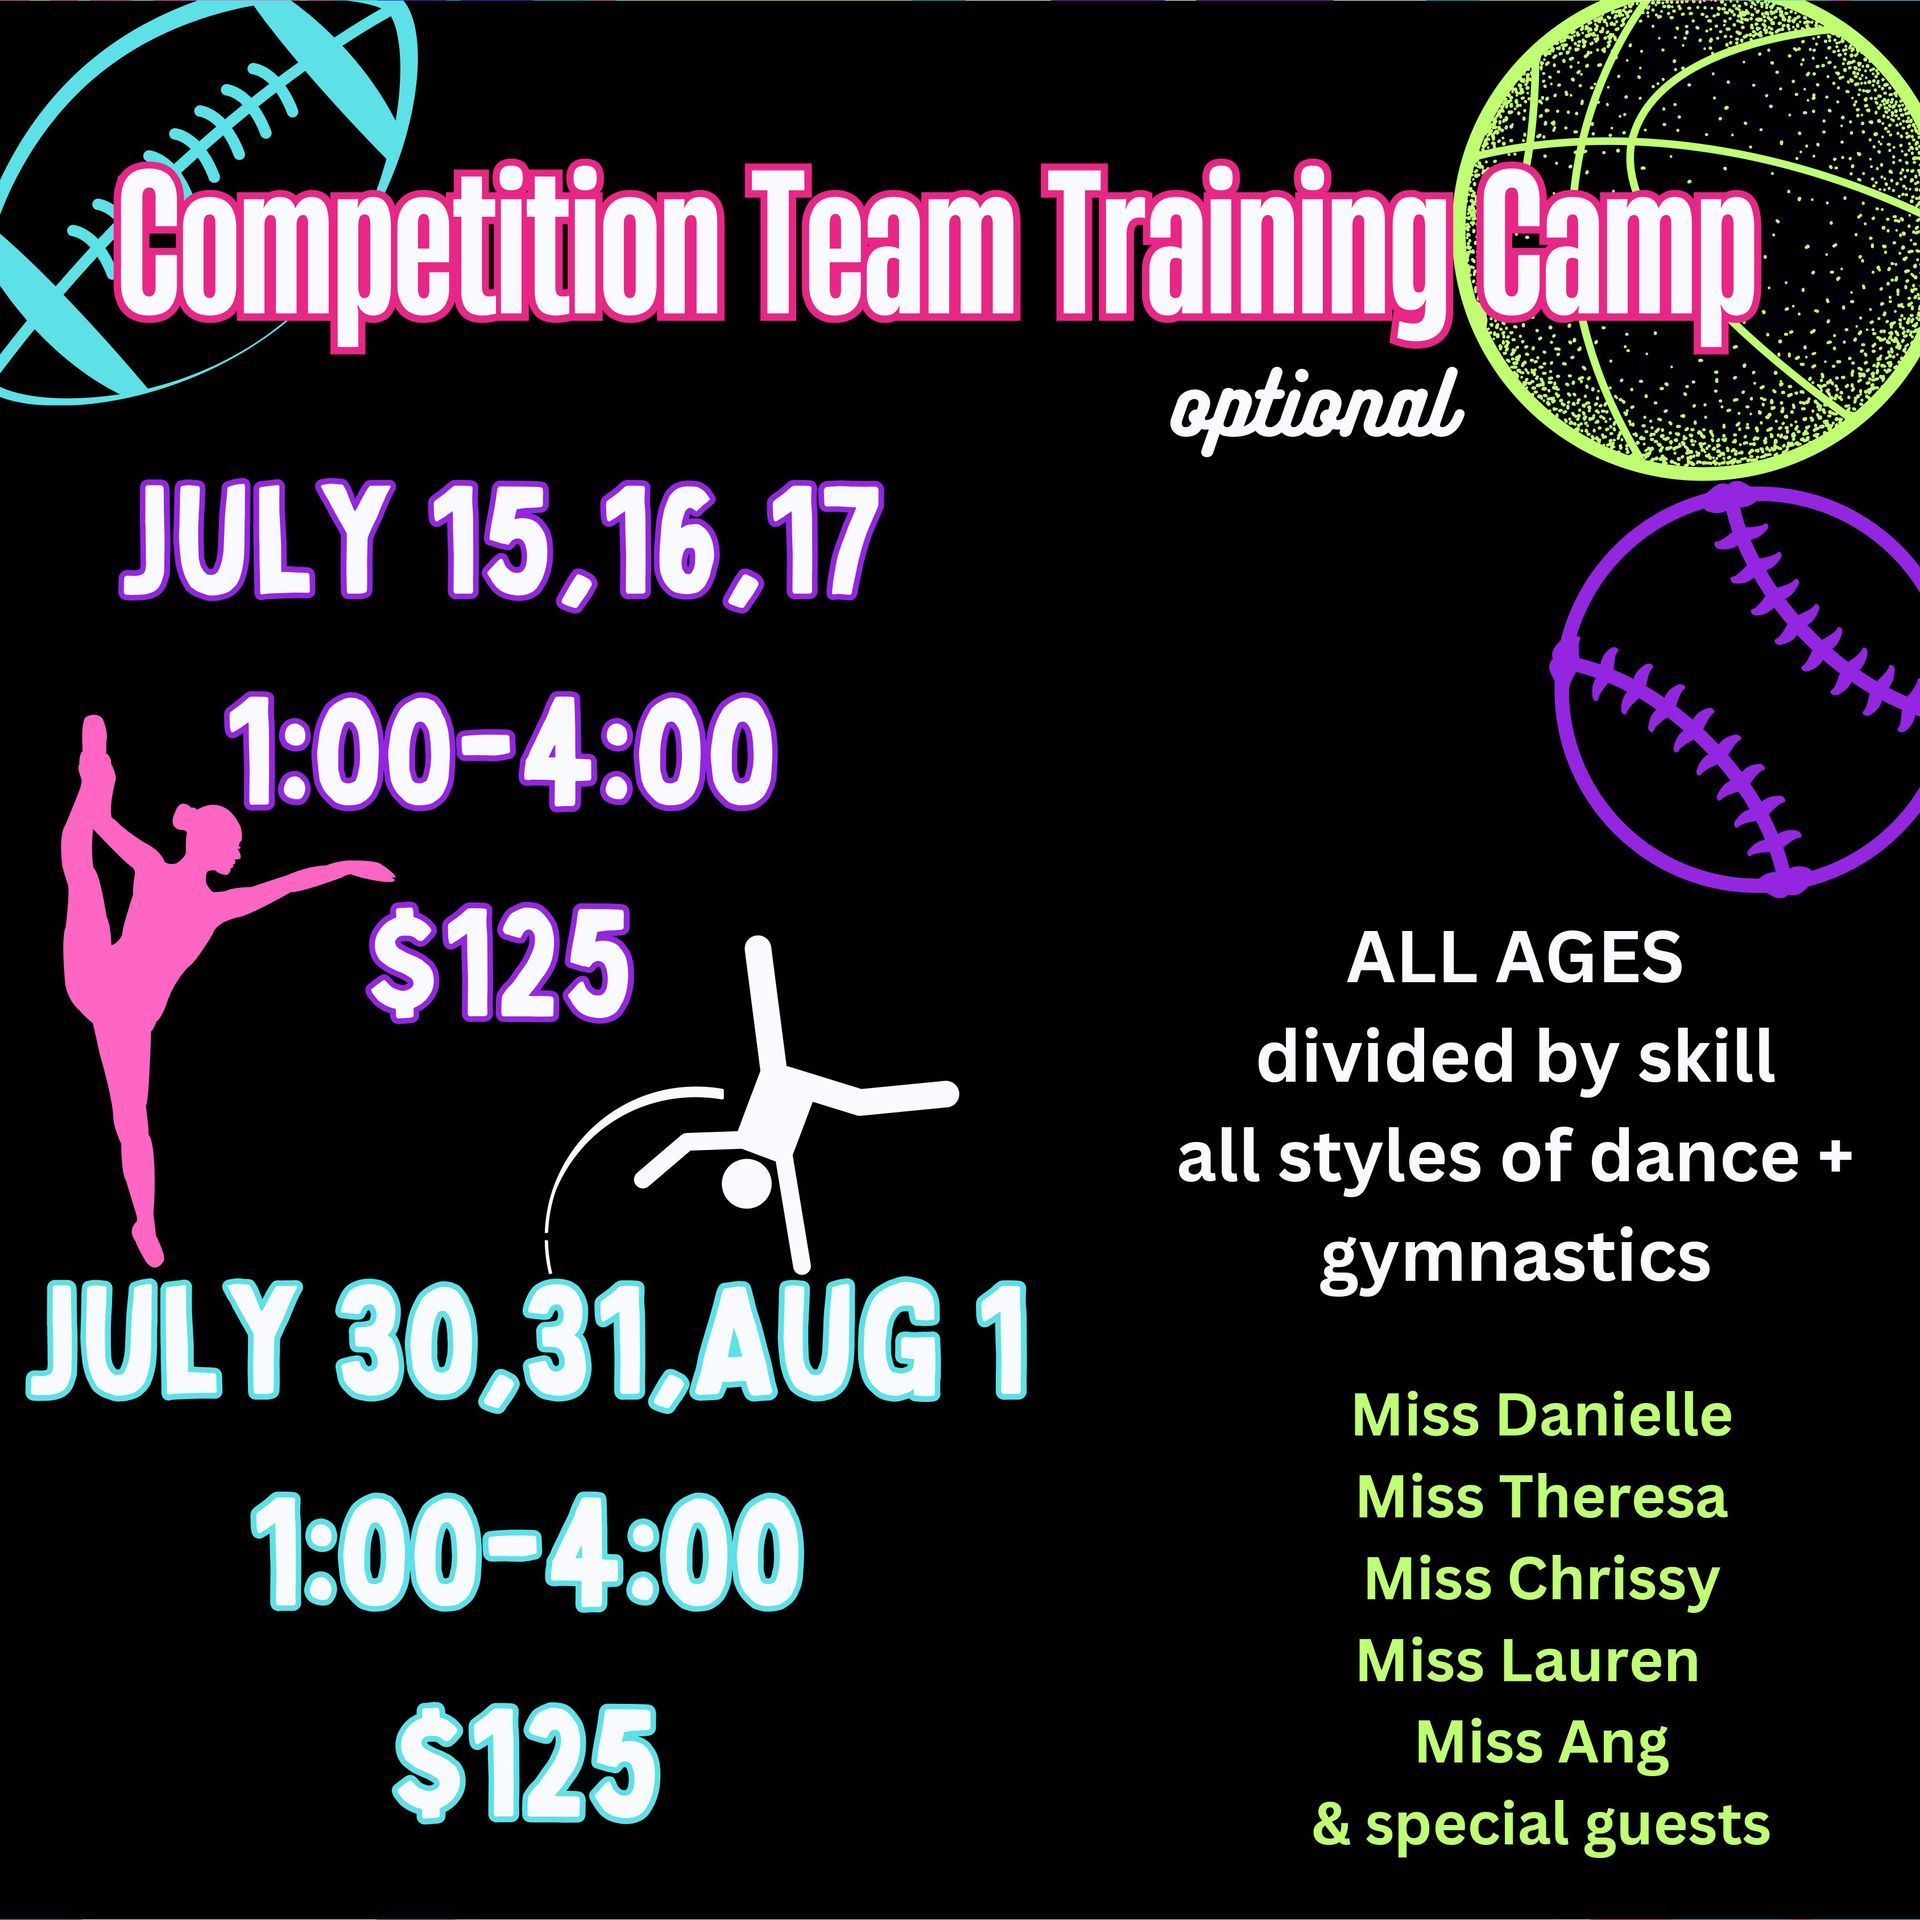 A poster advertising a competition team training camp